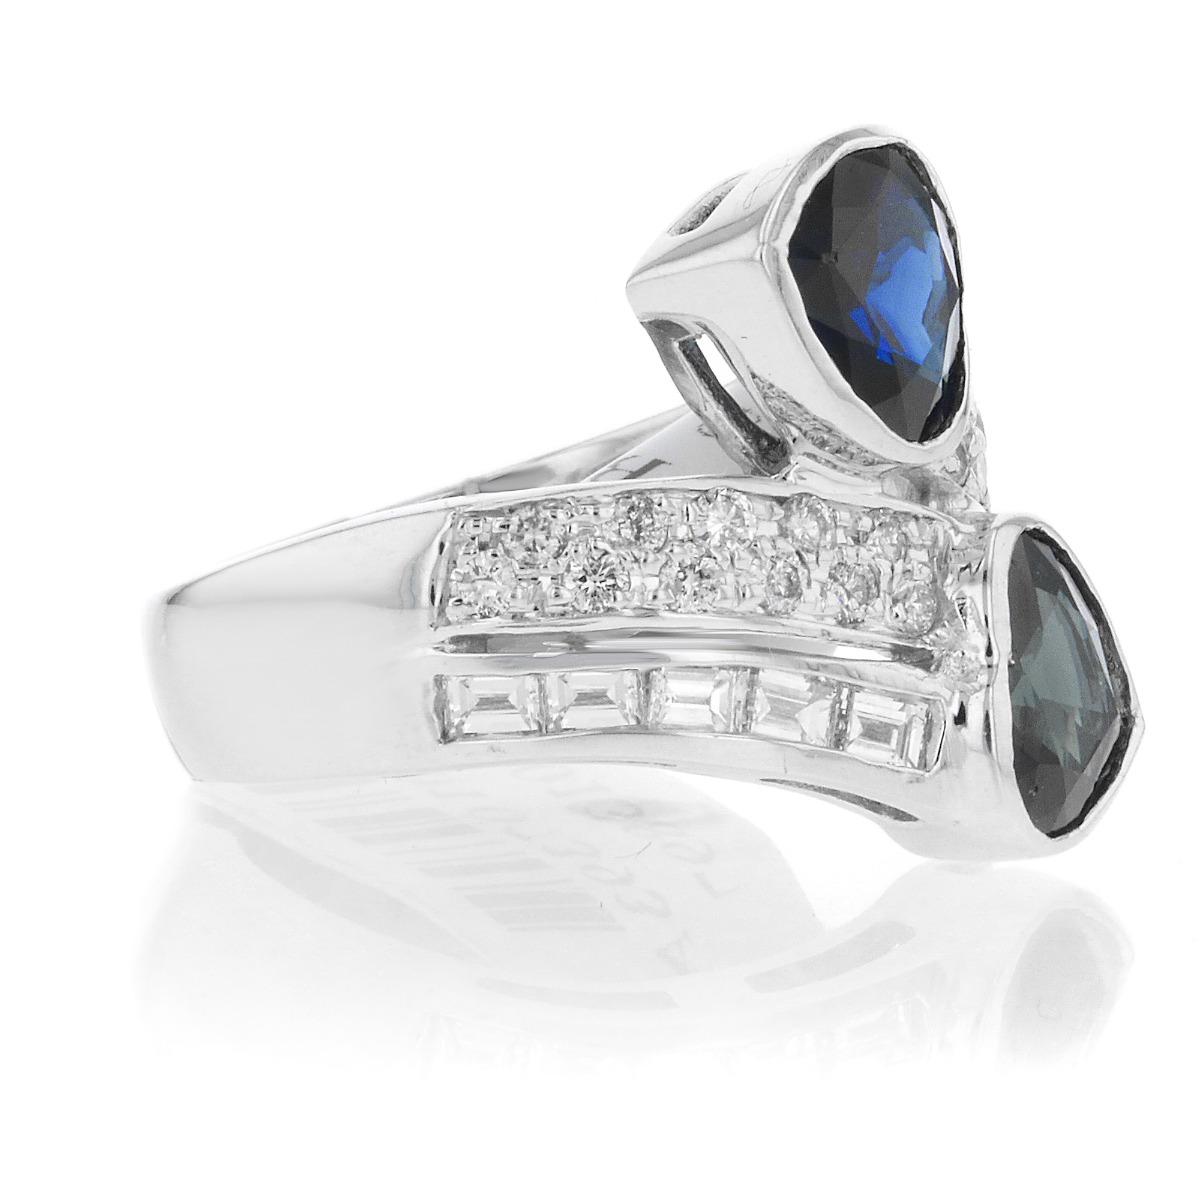 18k White Gold Navy Blue and White Diamond Cocktail Ring
7.6 Penny Weight
Approximately 32 Diamonds 
Ring Size: 6.5
Center Stone: Yes
Gemstone: Diamond
Stone Count: 32
Stone Shape: Heart Modified Brilliant 
Color Grade: G-H
Clarity Grade: